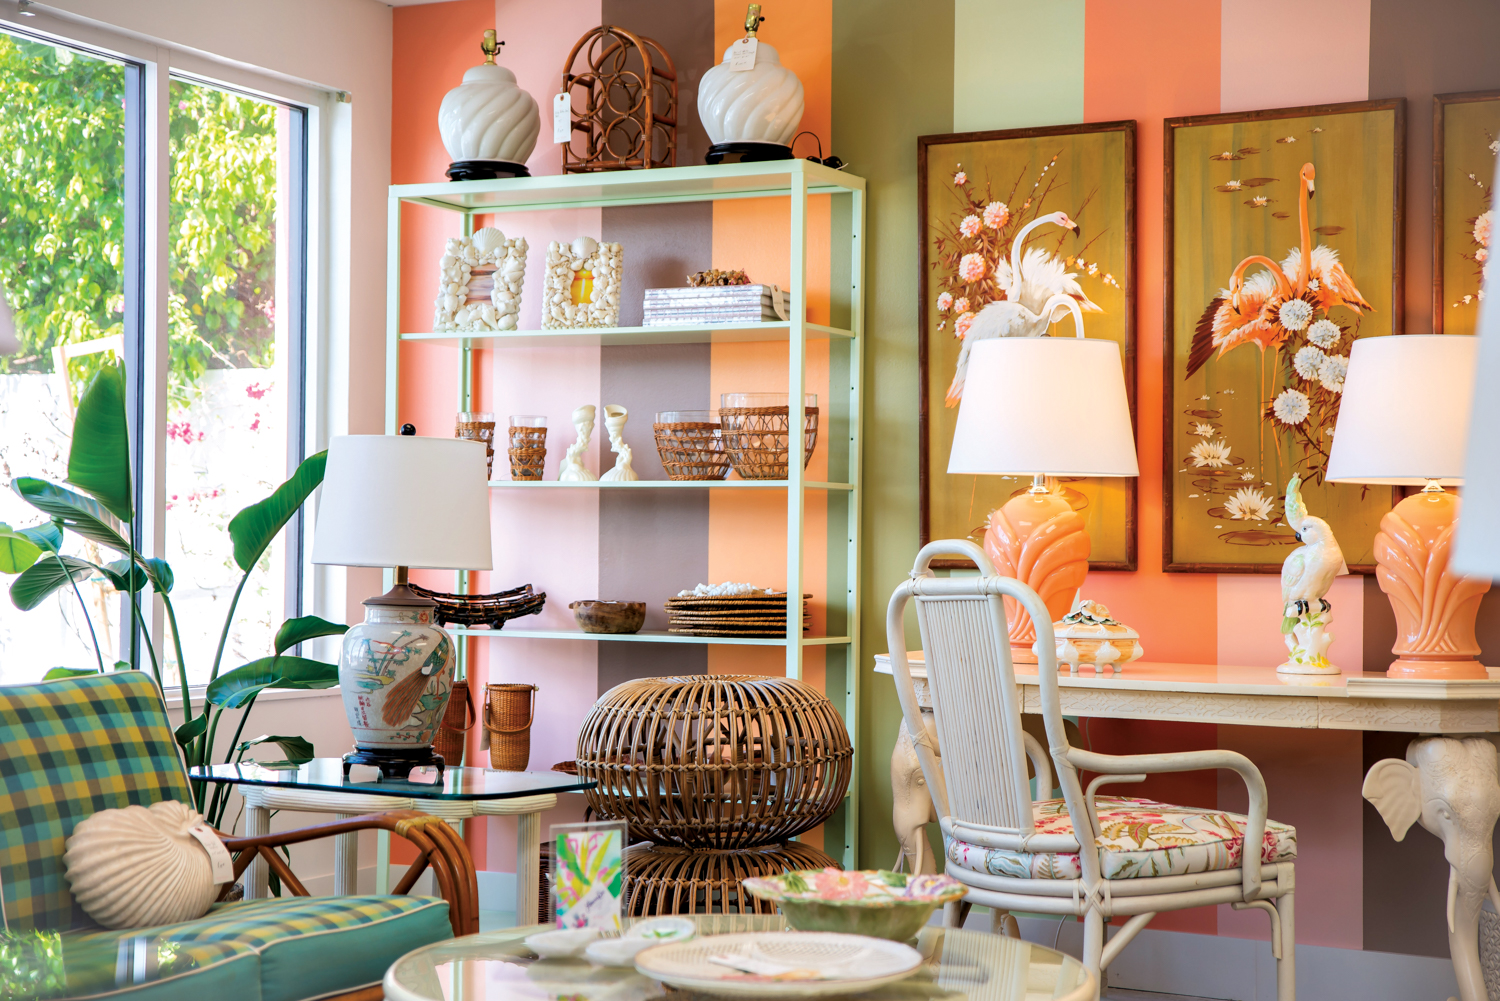 Vibrant Palm Beach showroom vignette with a lively mix of colors, patterns, and coastal-inspired decor